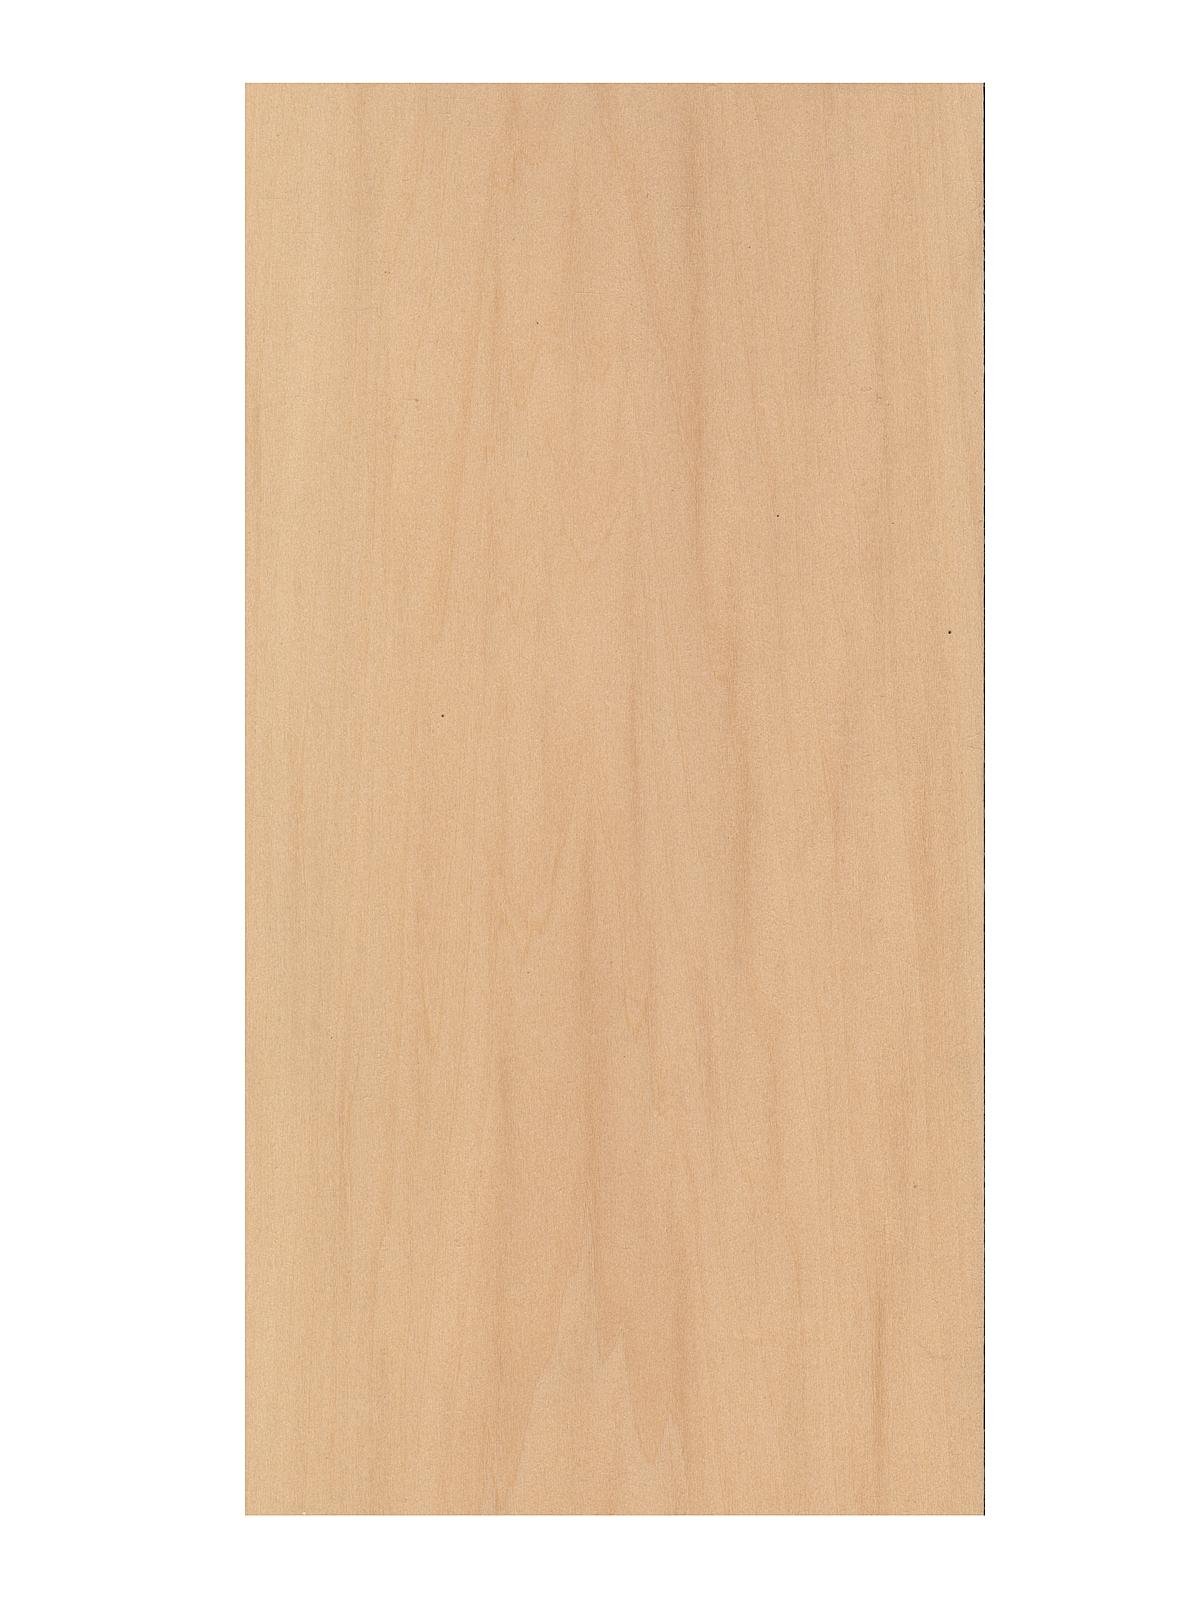 Midwest Products 4134 Basswood Sheet 1/4 x 8 x 24